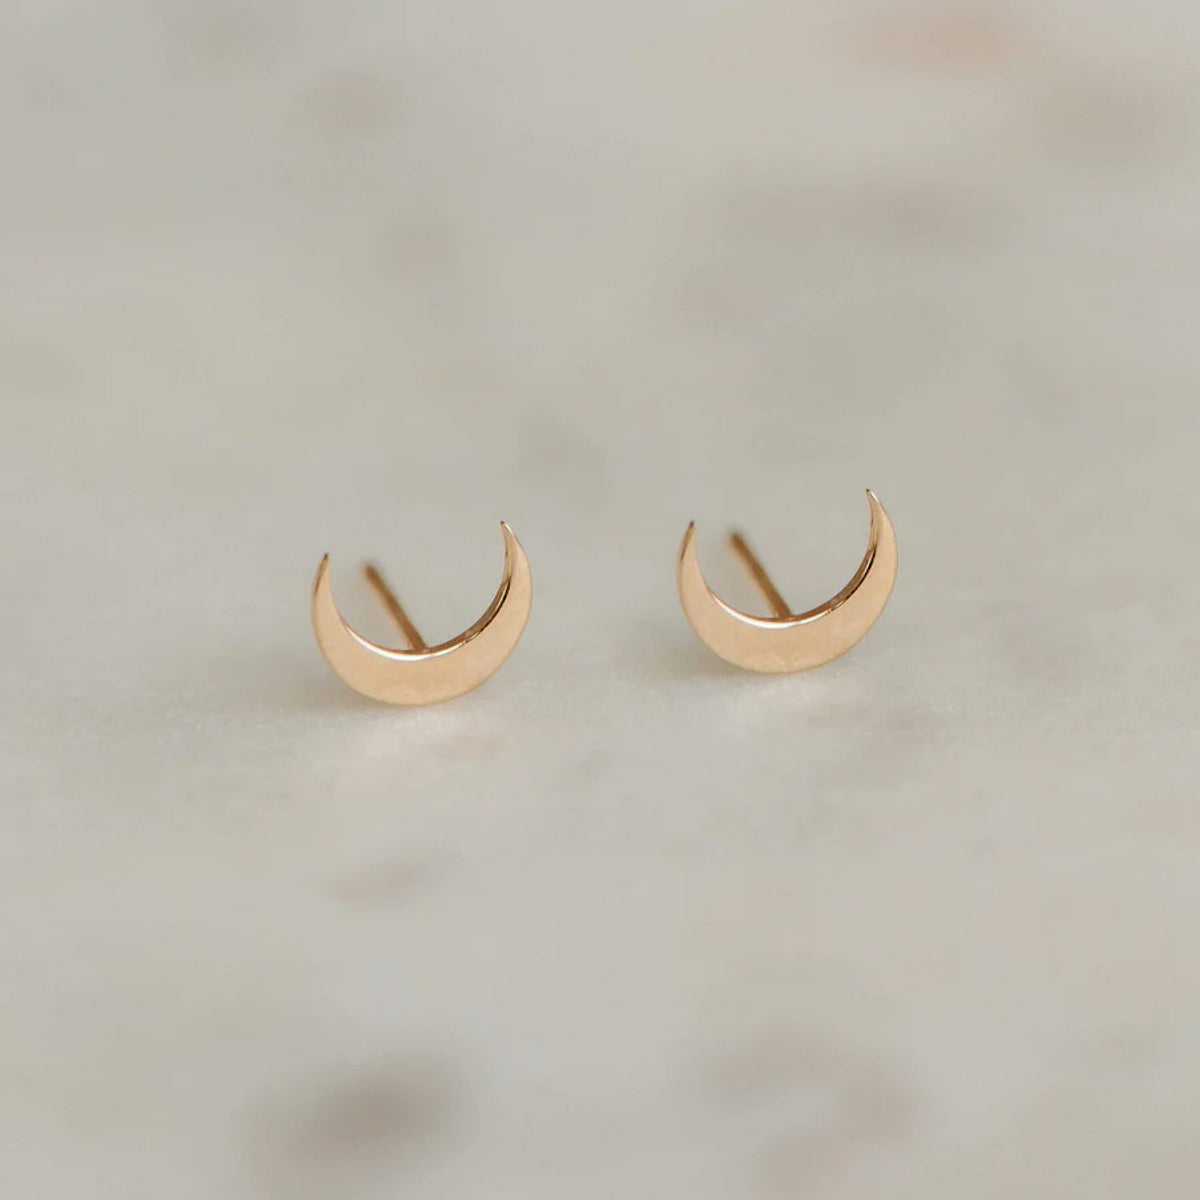 Everyday Larger Crescent Moon Earrings, 14k